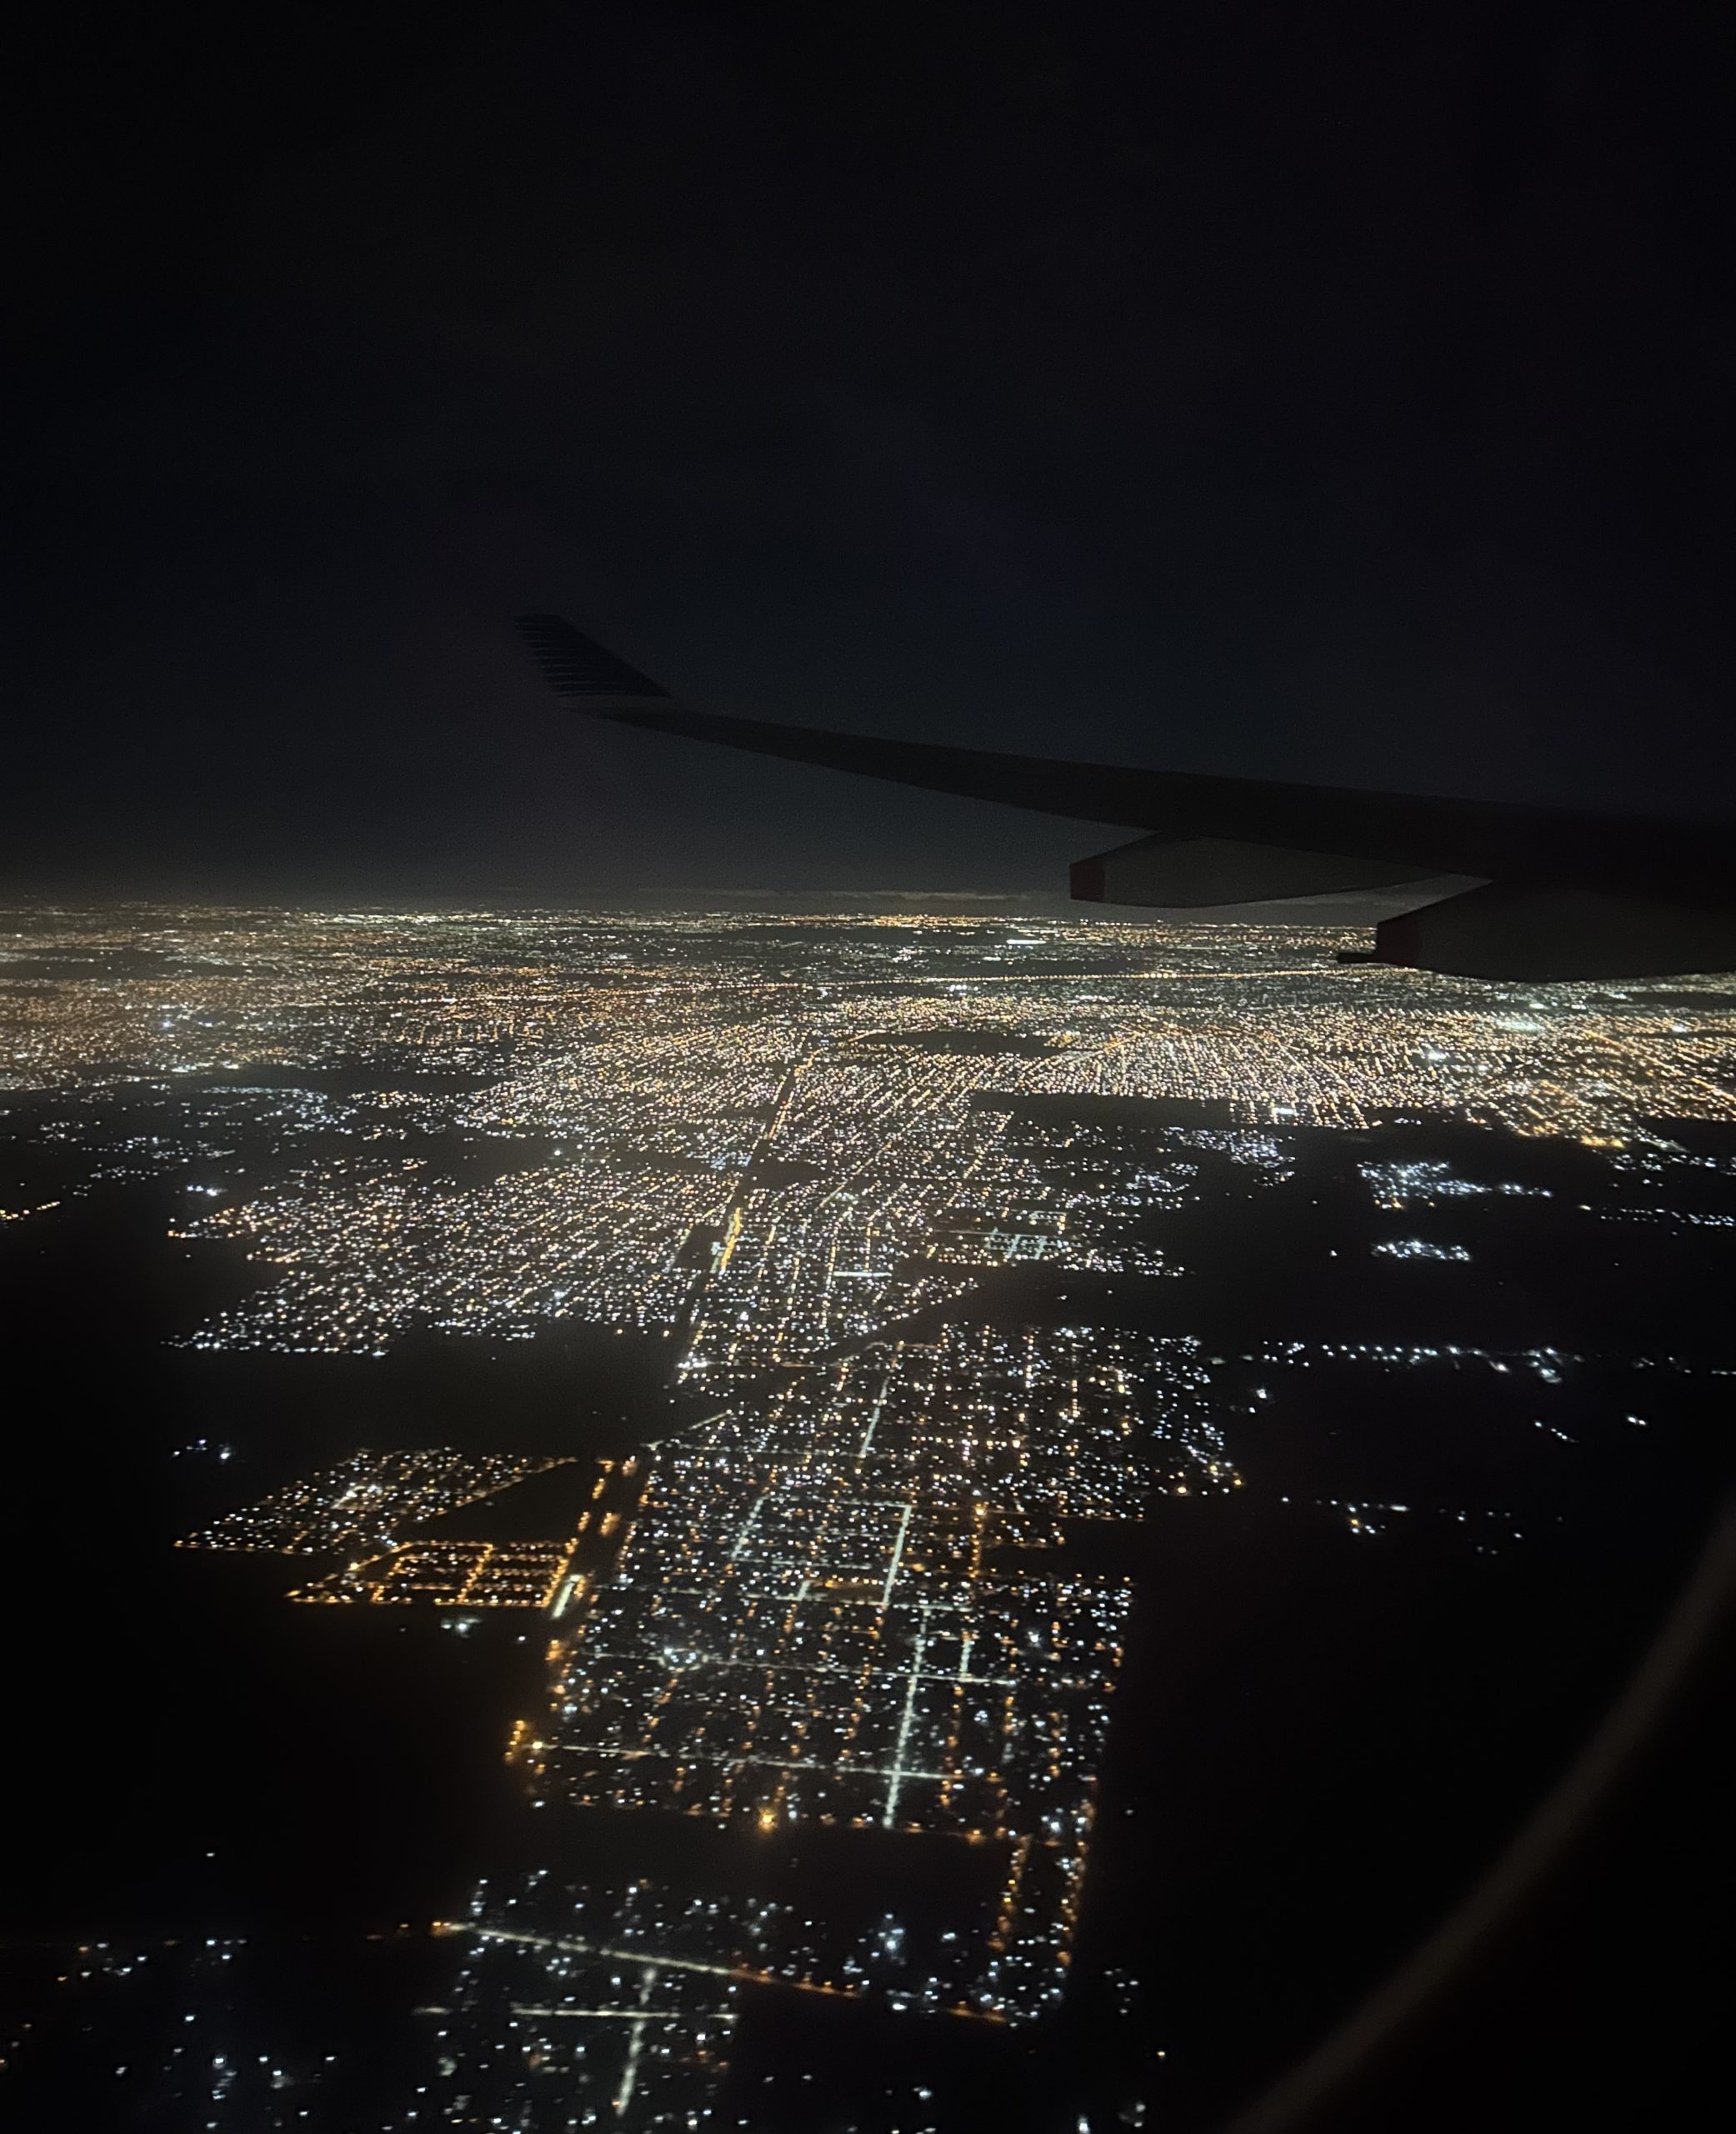 the lit up city of Buenos Aires from the airplane window